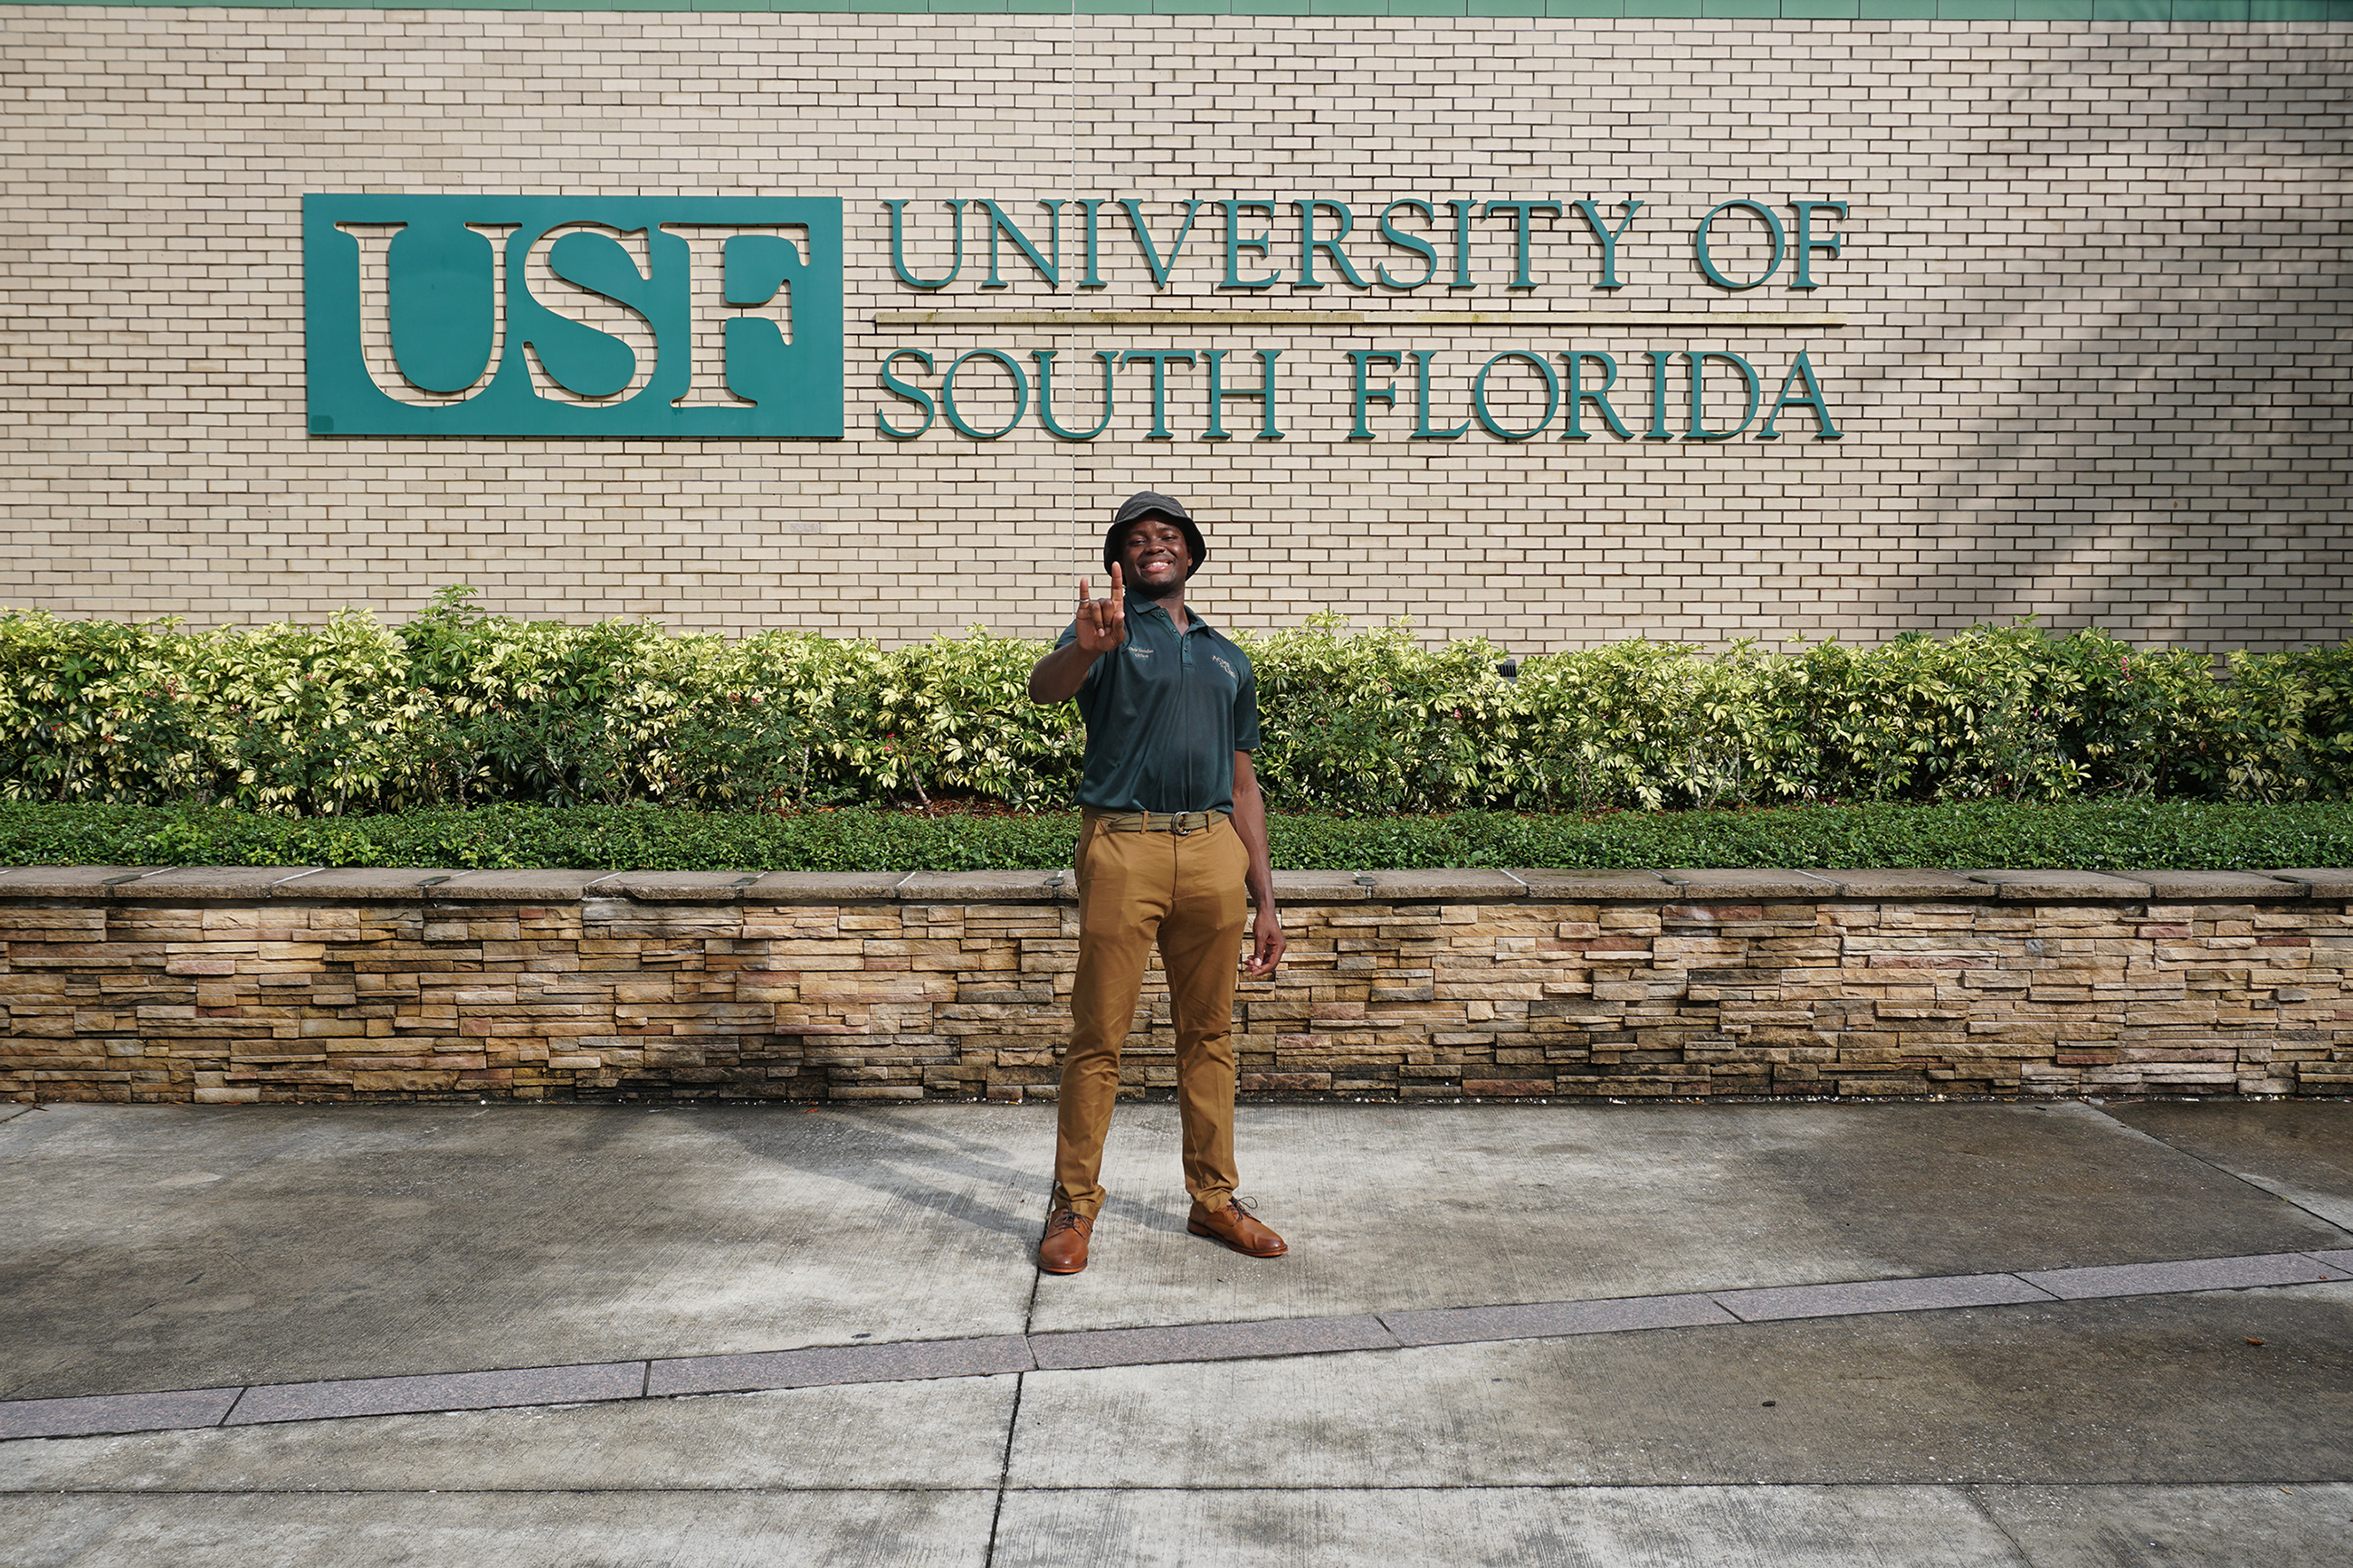 Ossie Douglas in front of the USF sign by the USF Bookstore